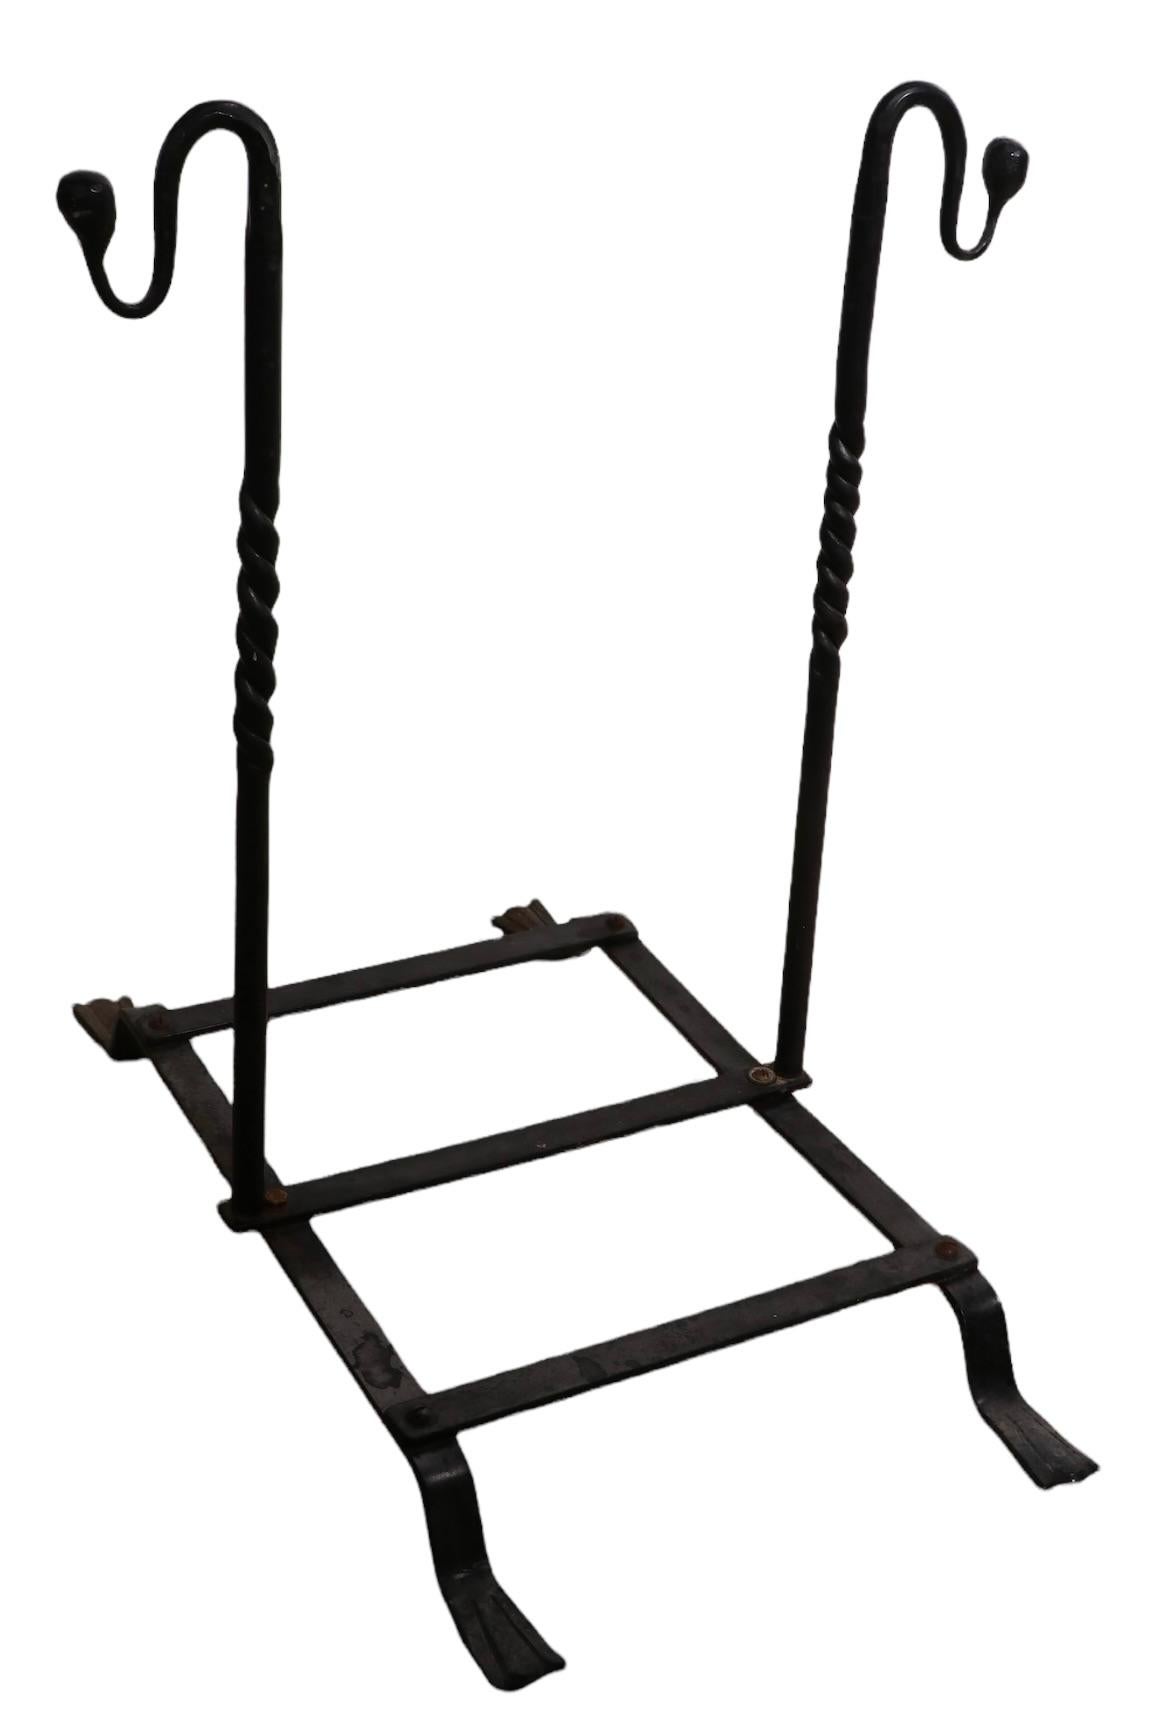 American Arts & Crafts Style Wrought Iron Fireplace Log Holder  For Sale